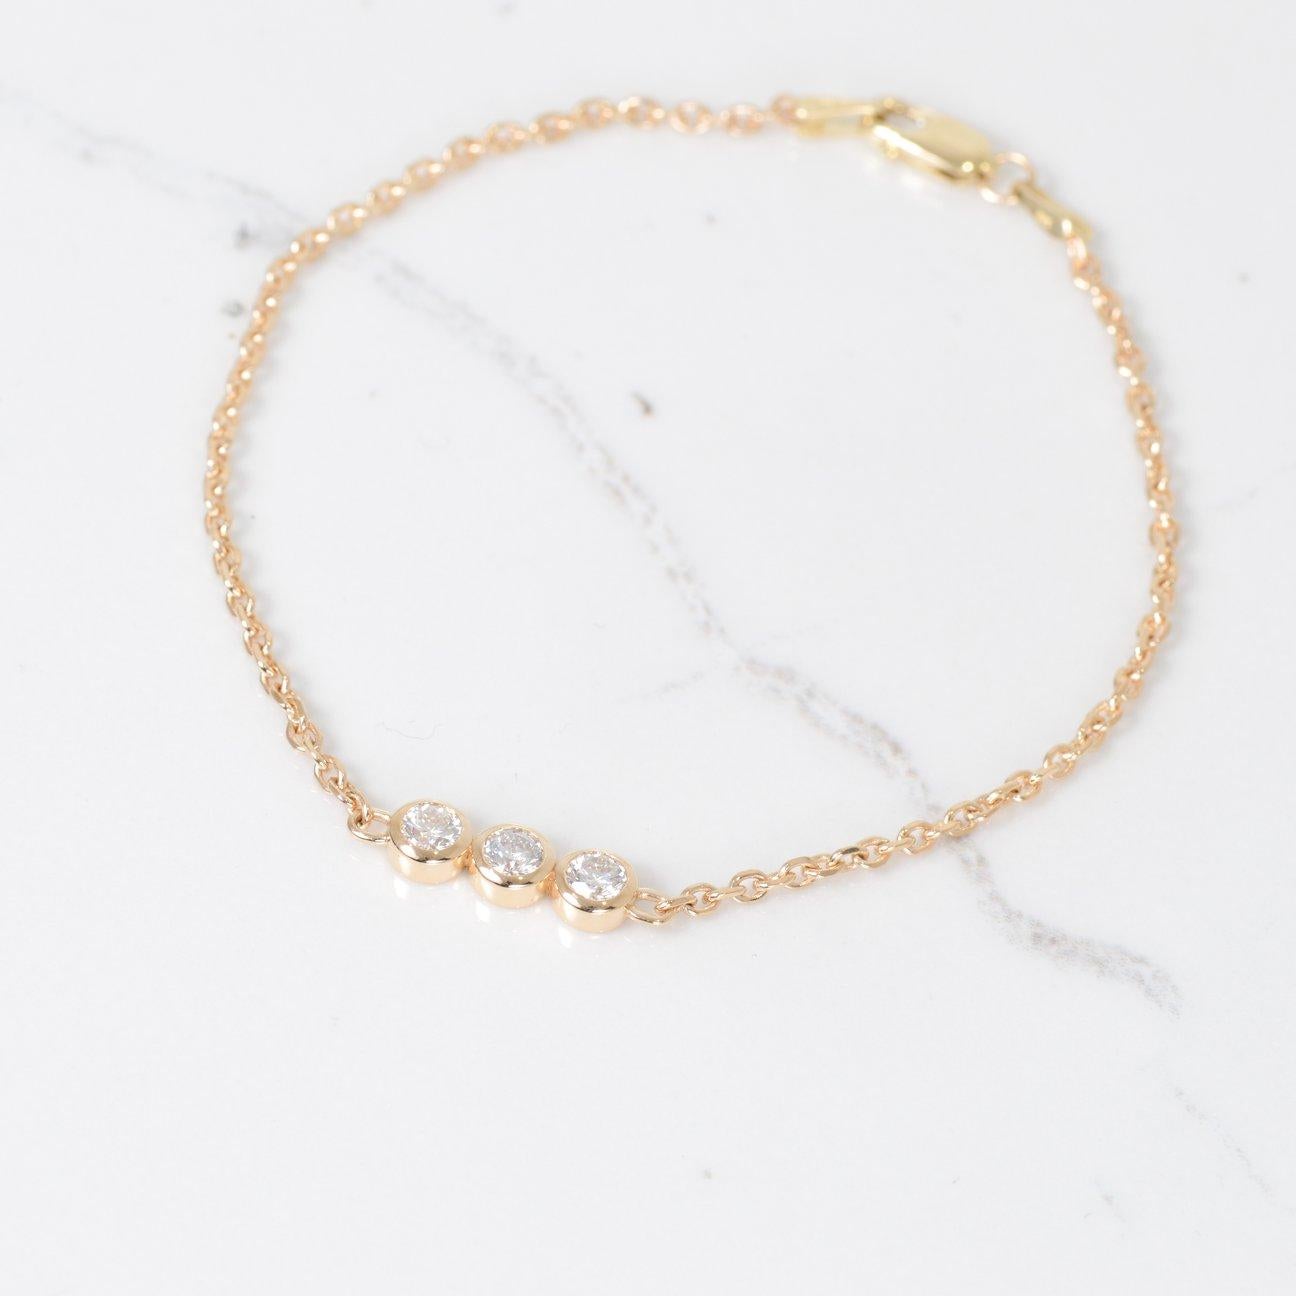 This diamond bracelet is truly beautiful! With three round diamonds in the center, totaling .45 carat and are set in 14k yellow gold. The bracelet measures 7 inches in length.